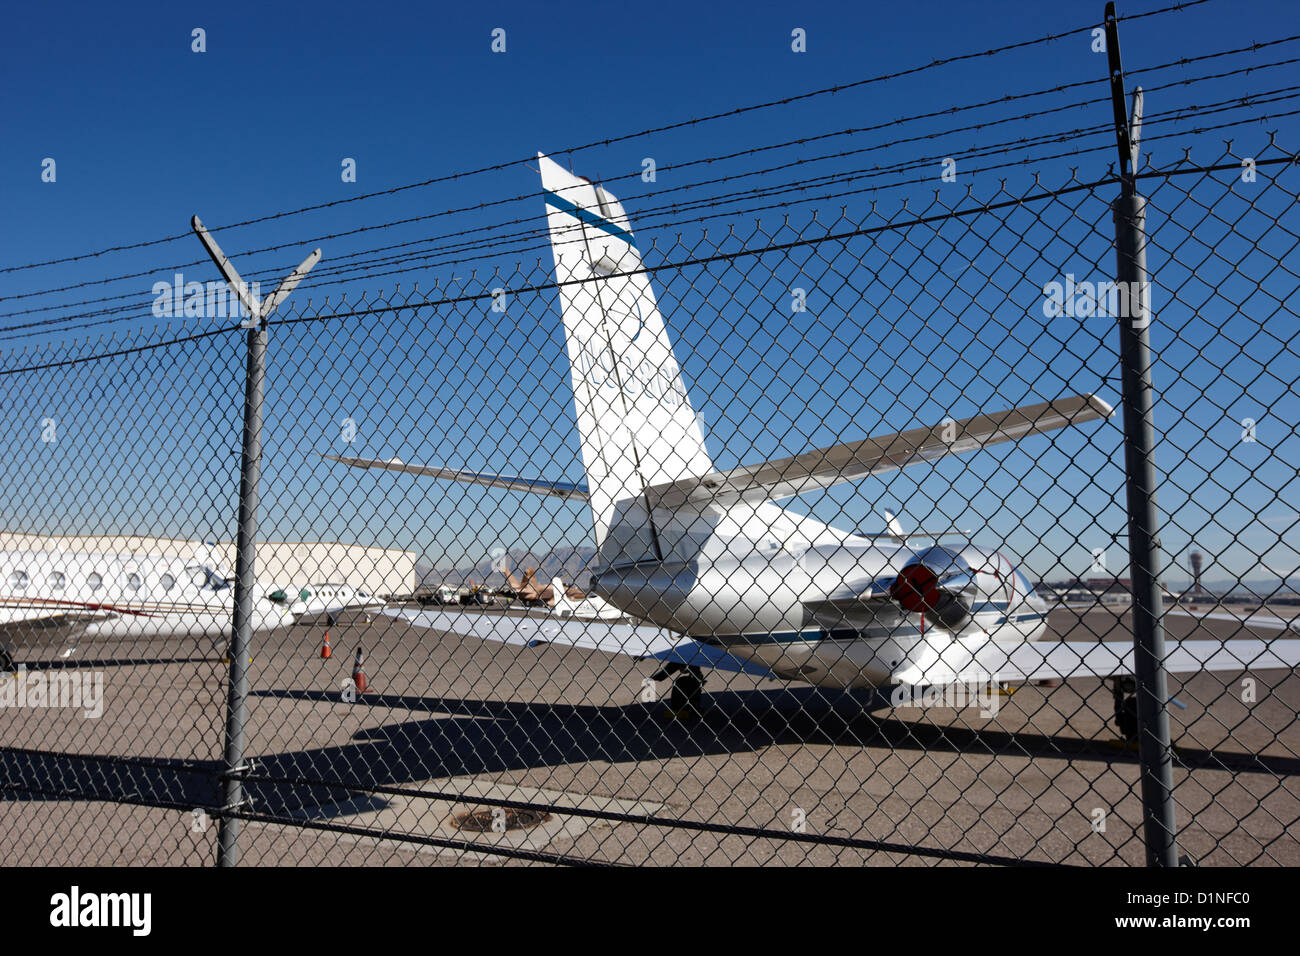 security chain link fencing with warning restricted area sign on the perimeter of mccarran airport Las Vegas Nevada USA Stock Photo